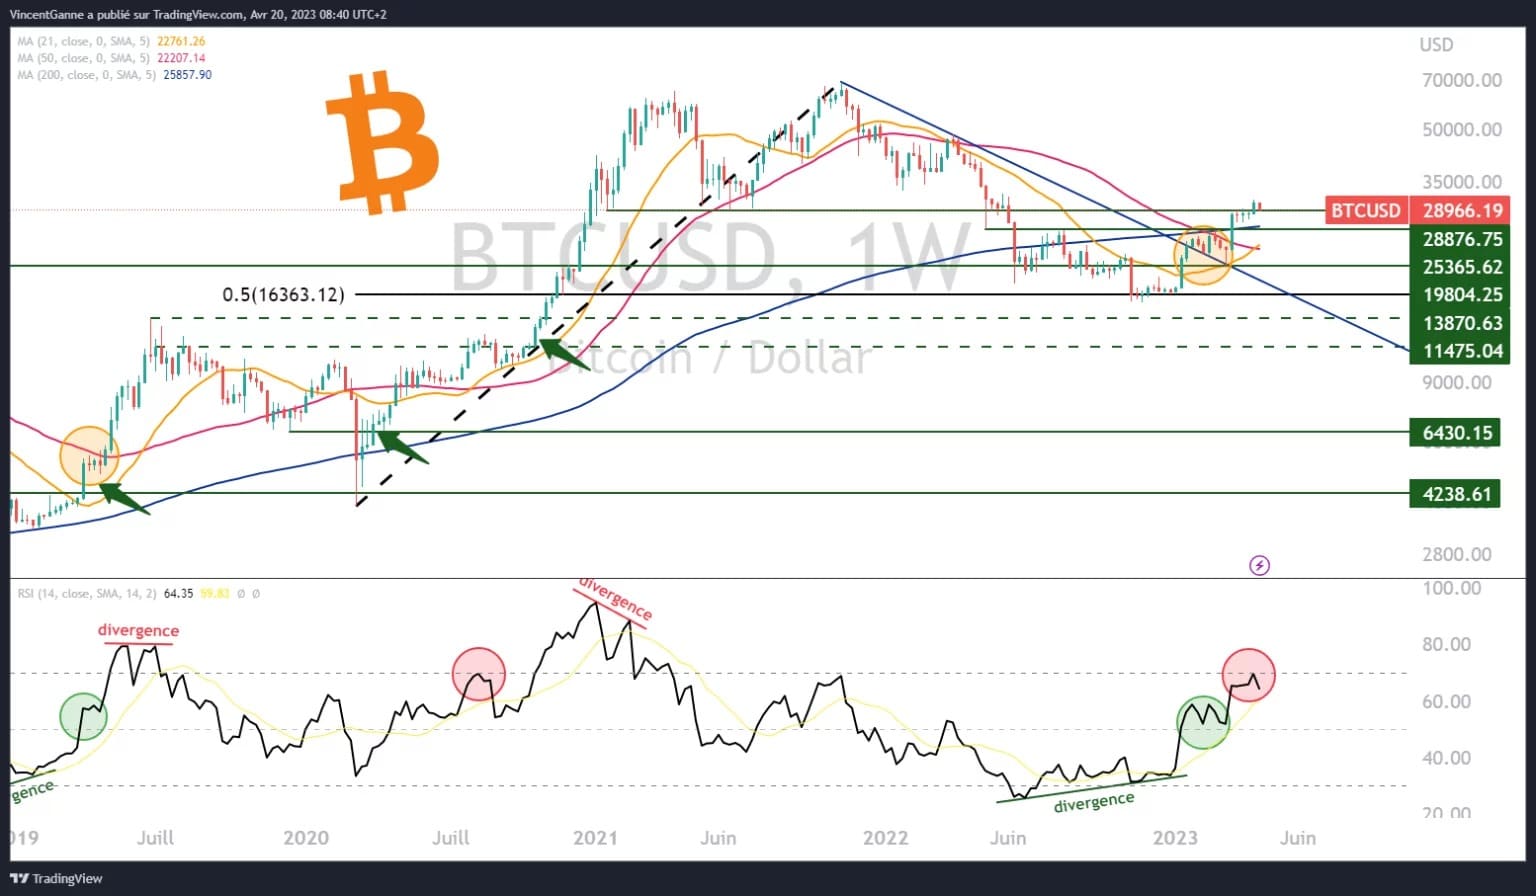 Chart that displays Japanese candlesticks in weekly bitcoin price data with logarithmic scale